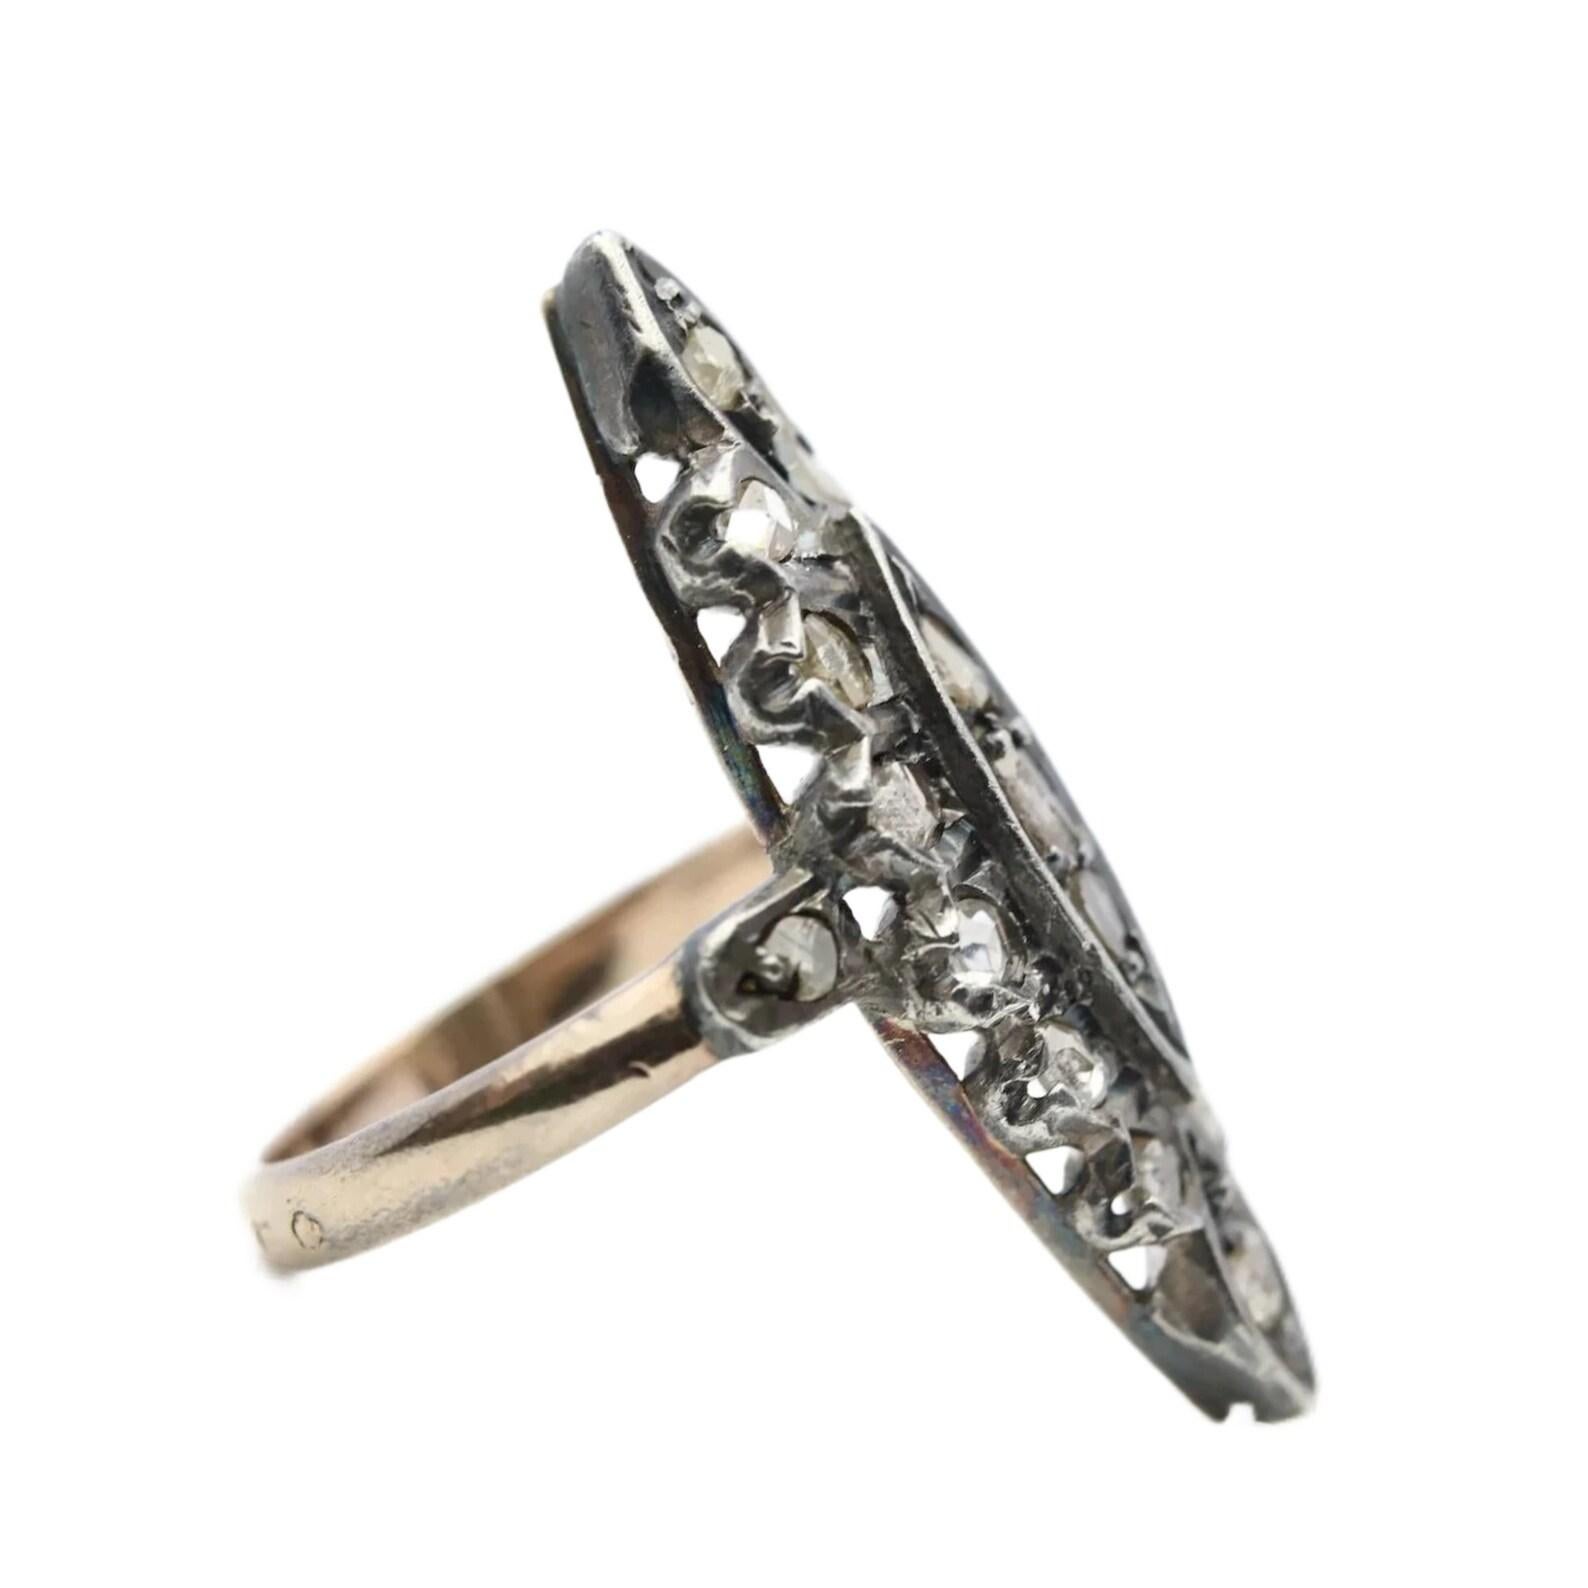 A handmade victorian period rose cut diamond naivette shaped ring in 18 karat gold and silver. Bearing French hallmarks on the shank, this mid 19th century ring features 19 antique rose cut diamonds set in richly patina'd silver.

In excellent